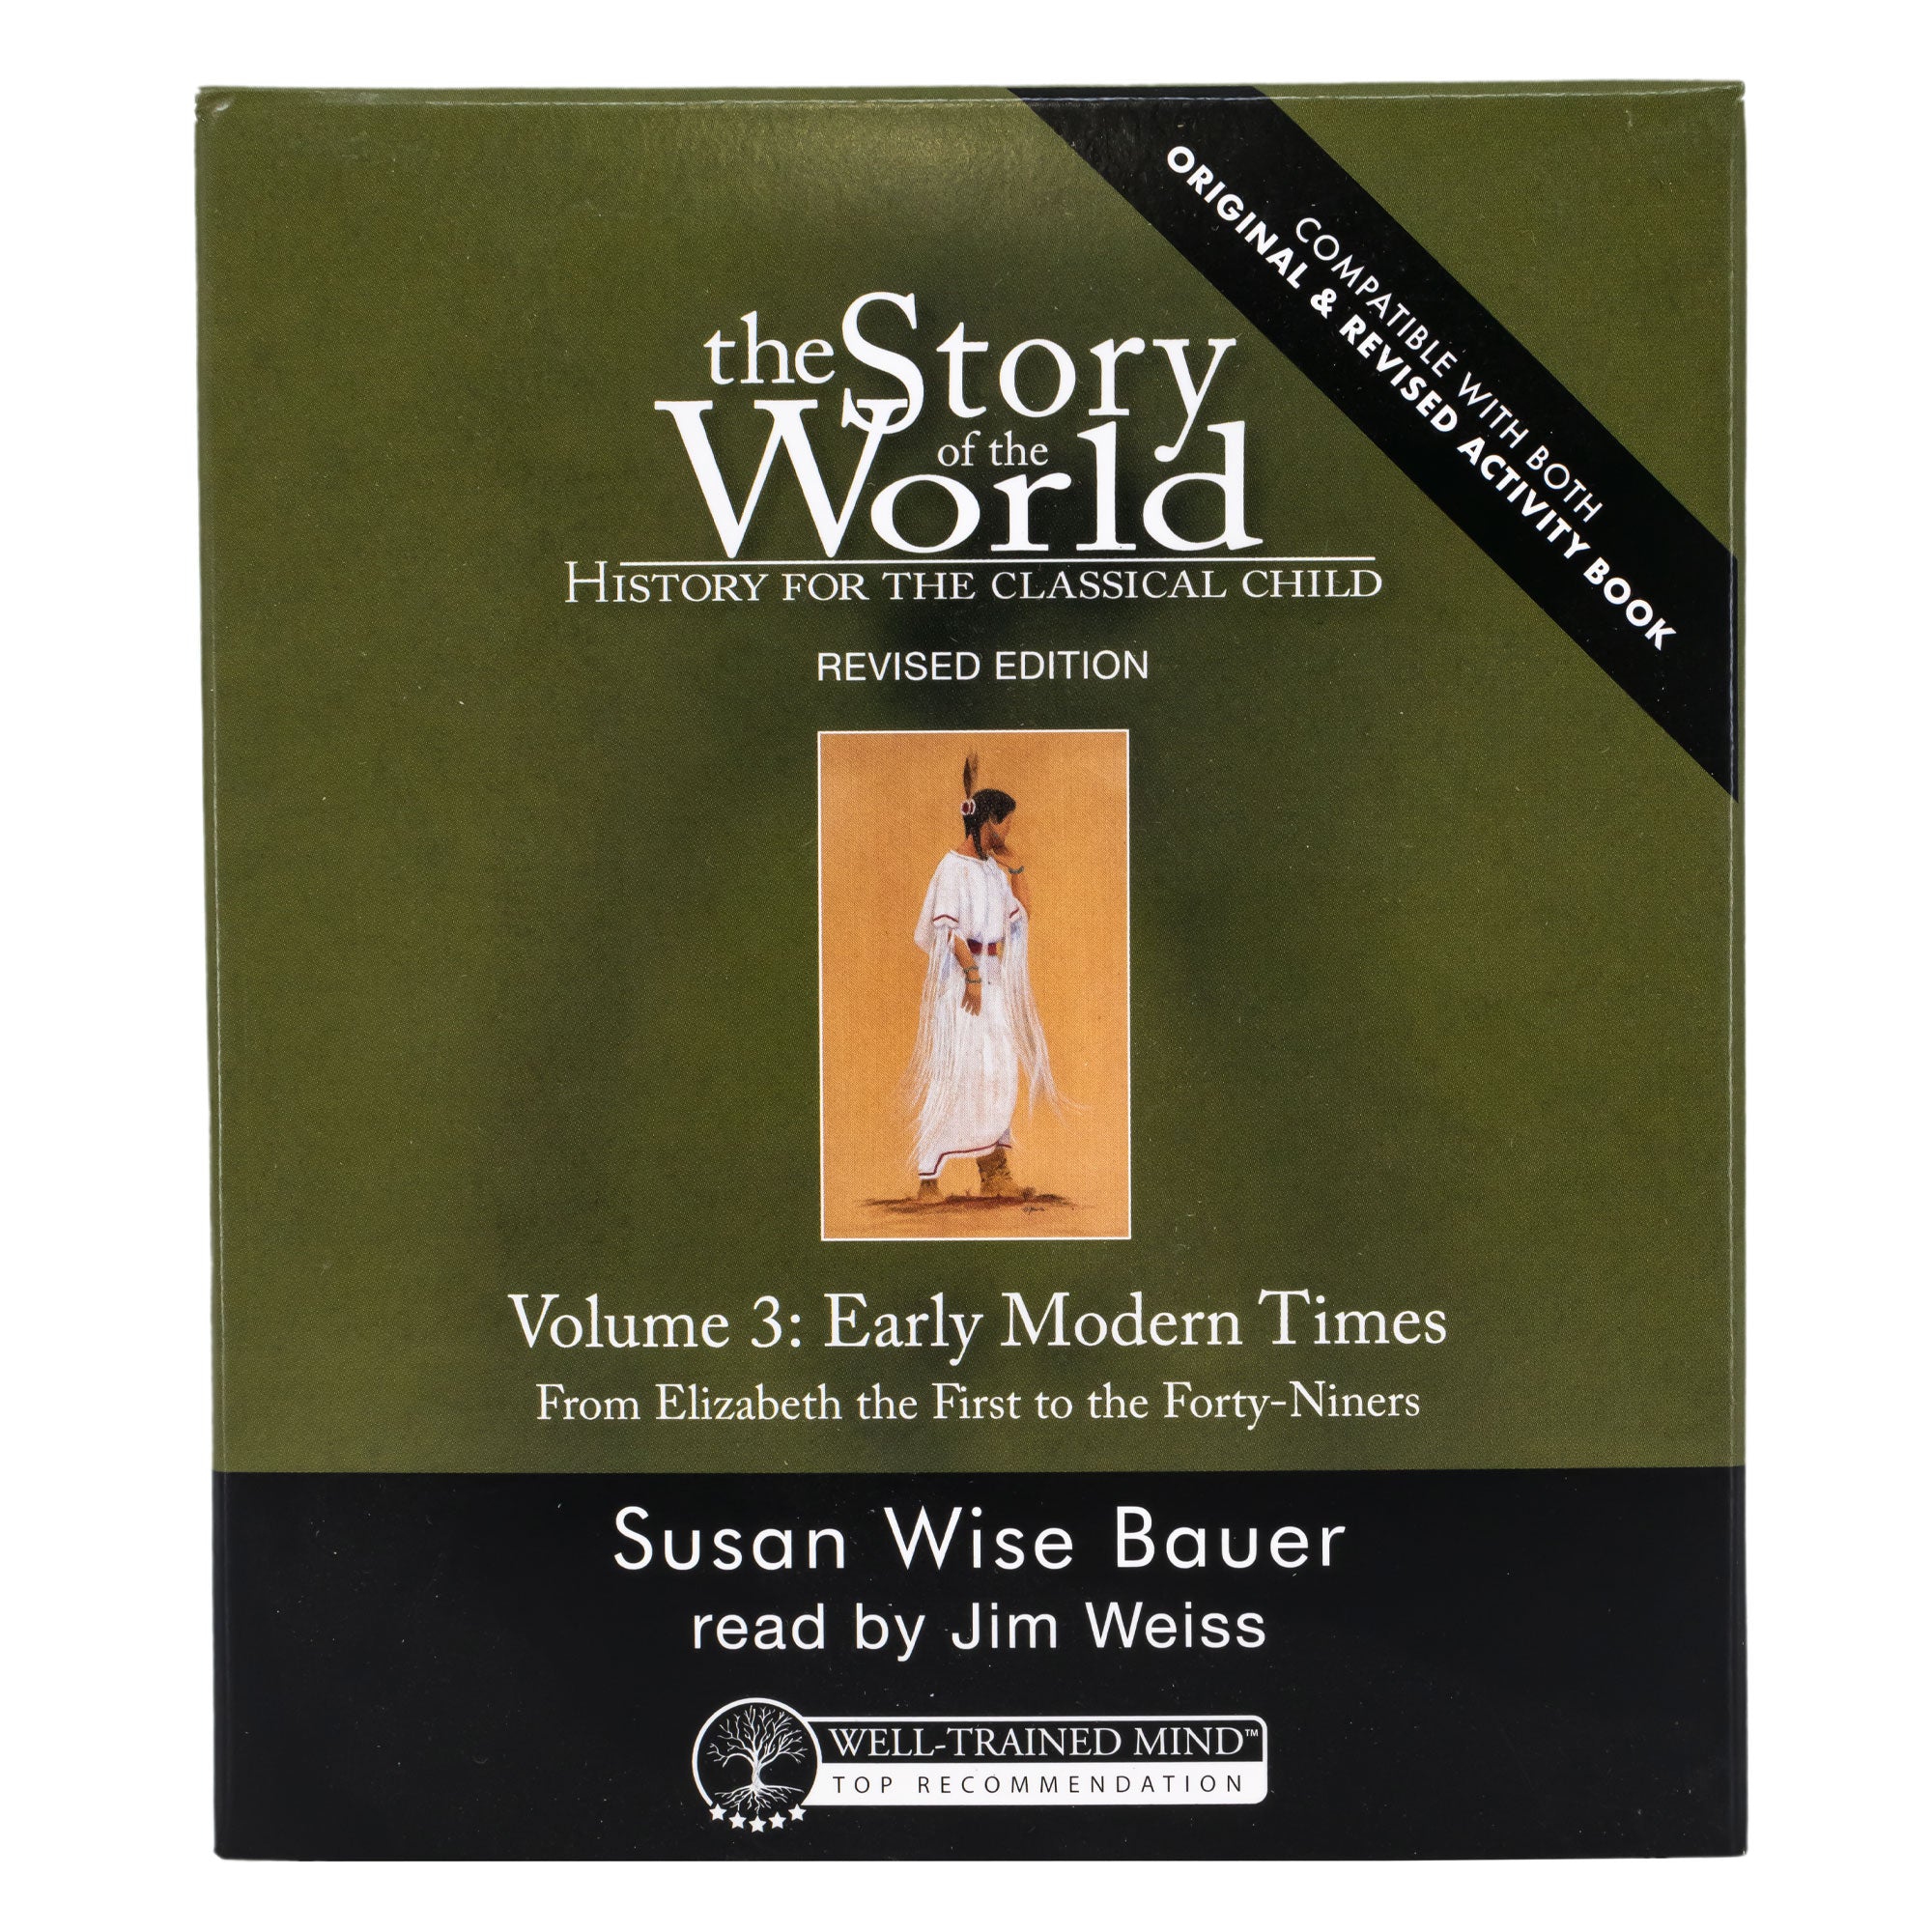 The Story of the World 3 audio book cover. The cover is mainly green with a black bottom and a small illustration of a Native American woman in a white dress in the middle. The white text reads “The Story of the World. History for the classical child. Revised Edition. Volume 3, Early Modern Times. From Elizabeth the First to the Forty-Niners. Susan Wise Bauer. Read by Jim Weiss.”